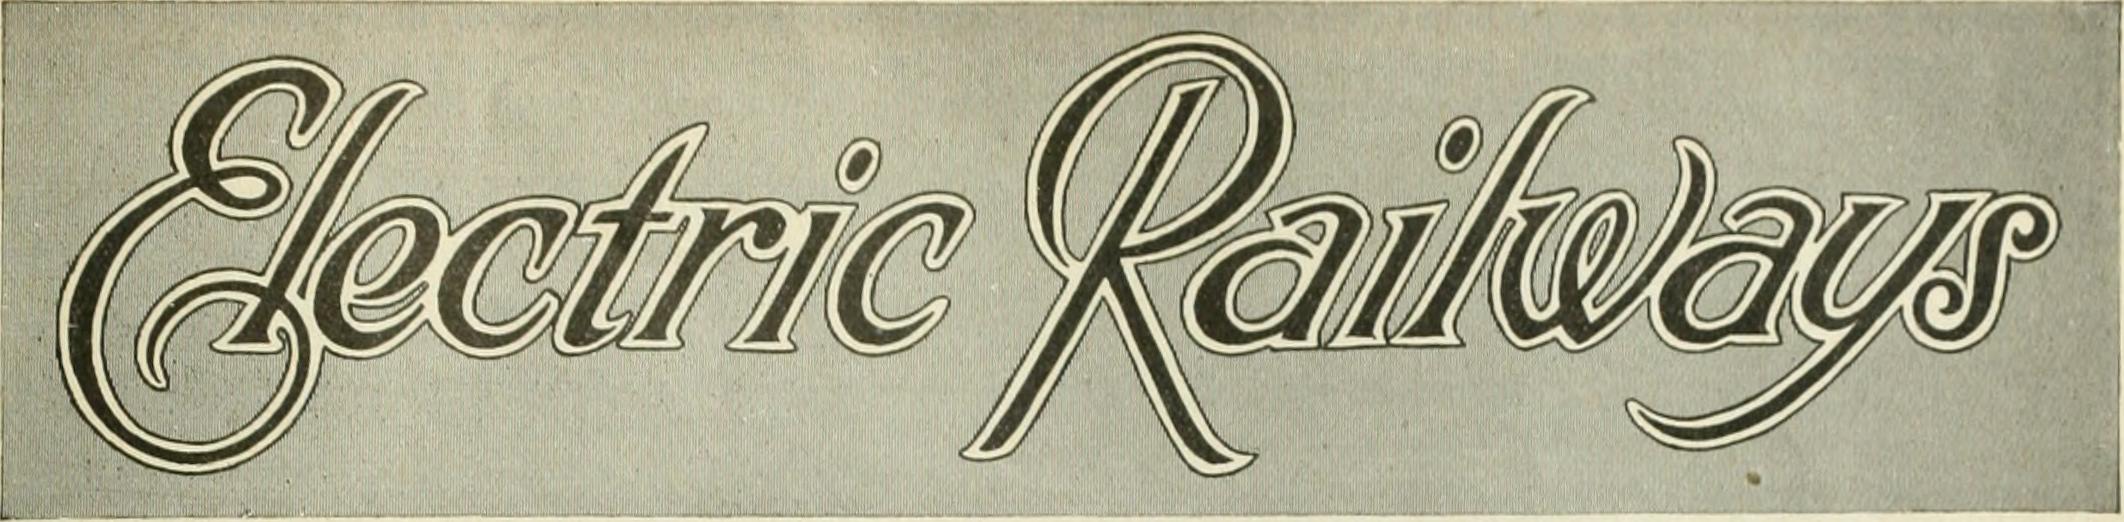 Image from page 113 of "Electrical news and engineering" (1891)